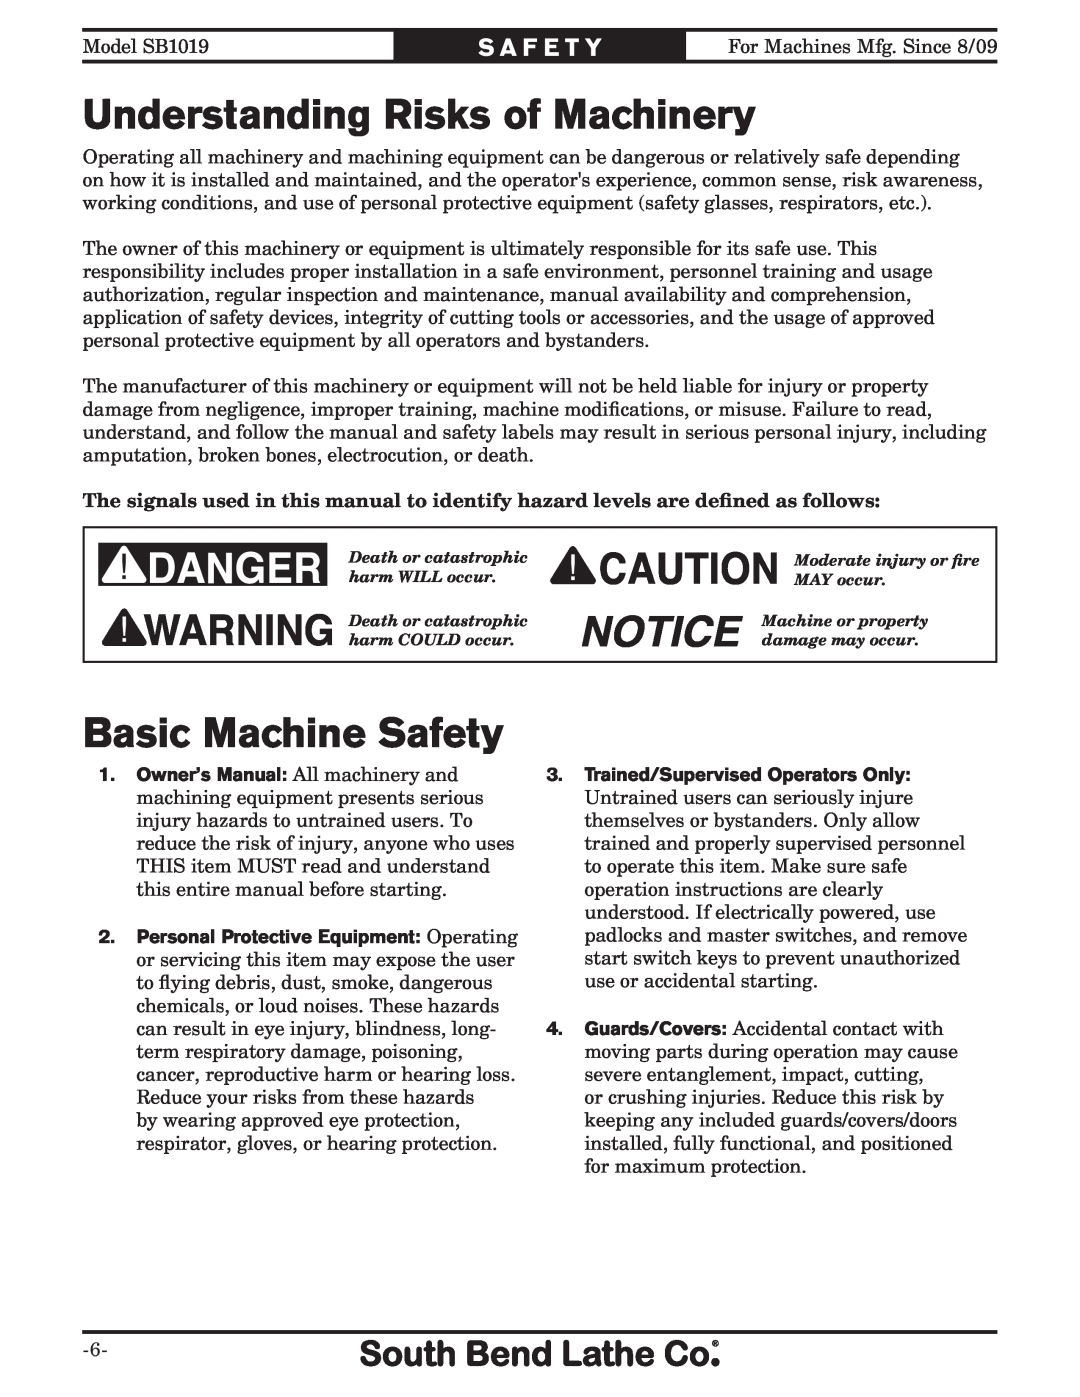 Southbend SB1019 Understanding Risks of Machinery, Basic Machine Safety, S A F E T Y, Trained/Supervised Operators Only 